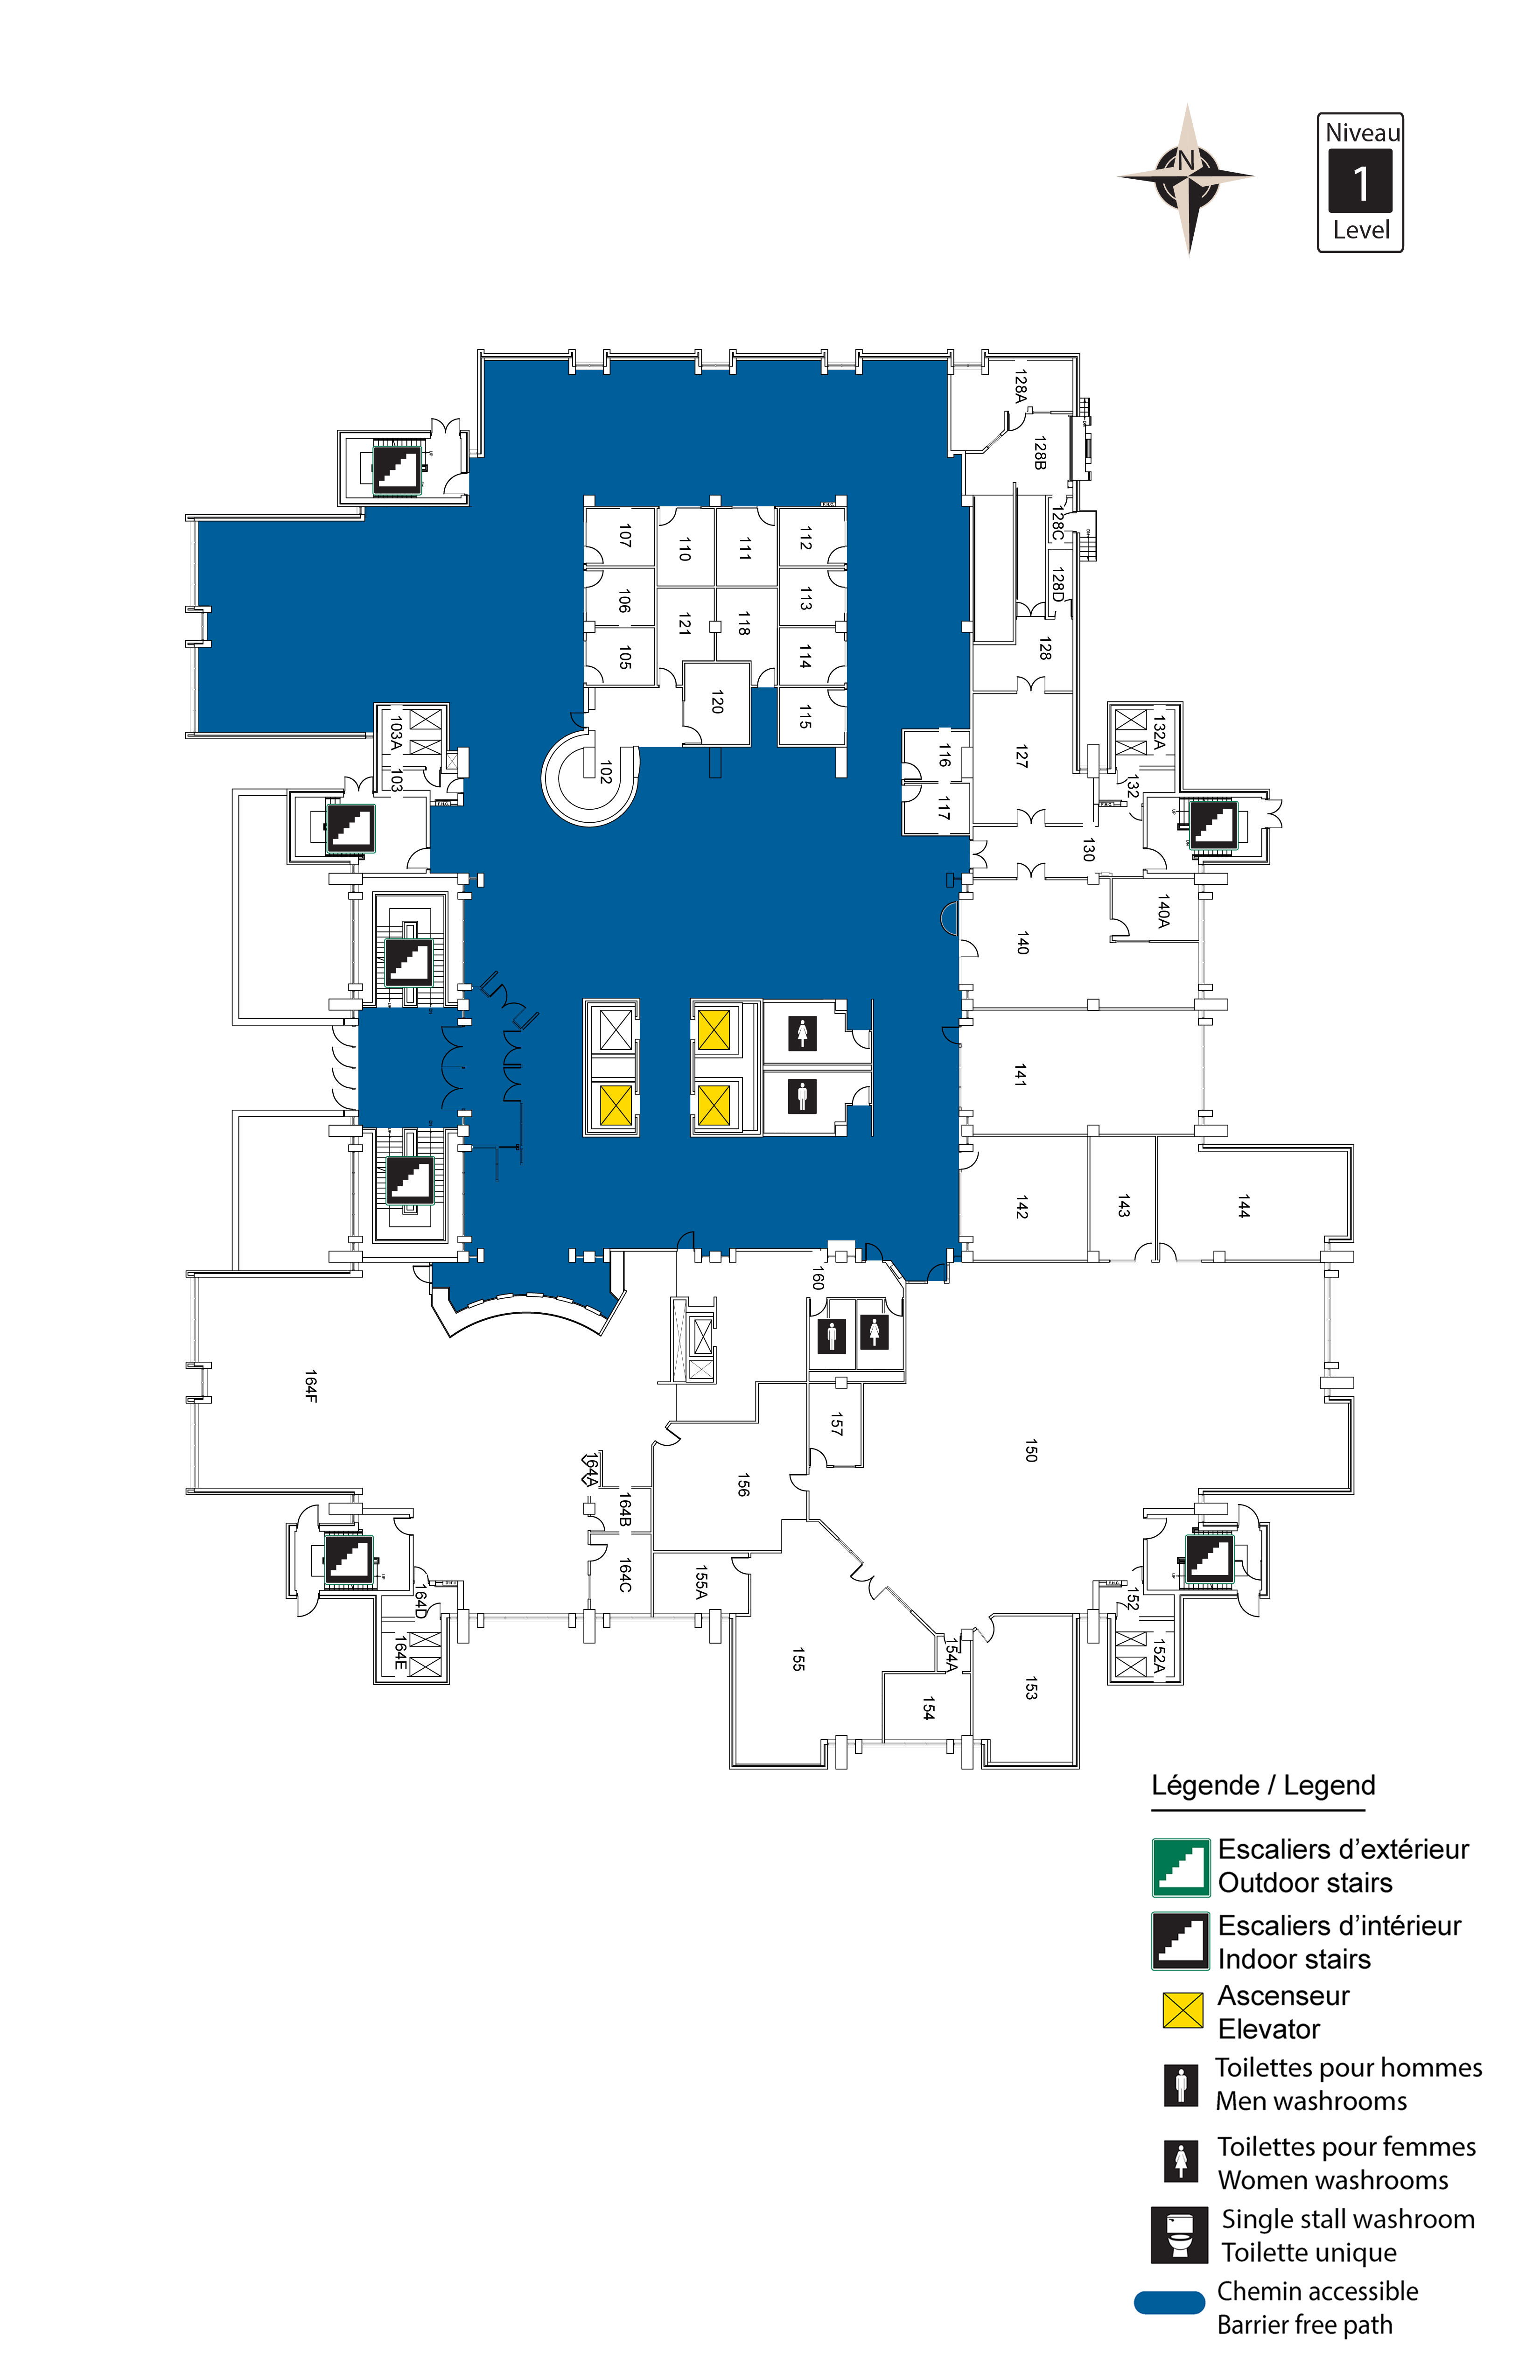 Accessible map of Morisset level 1